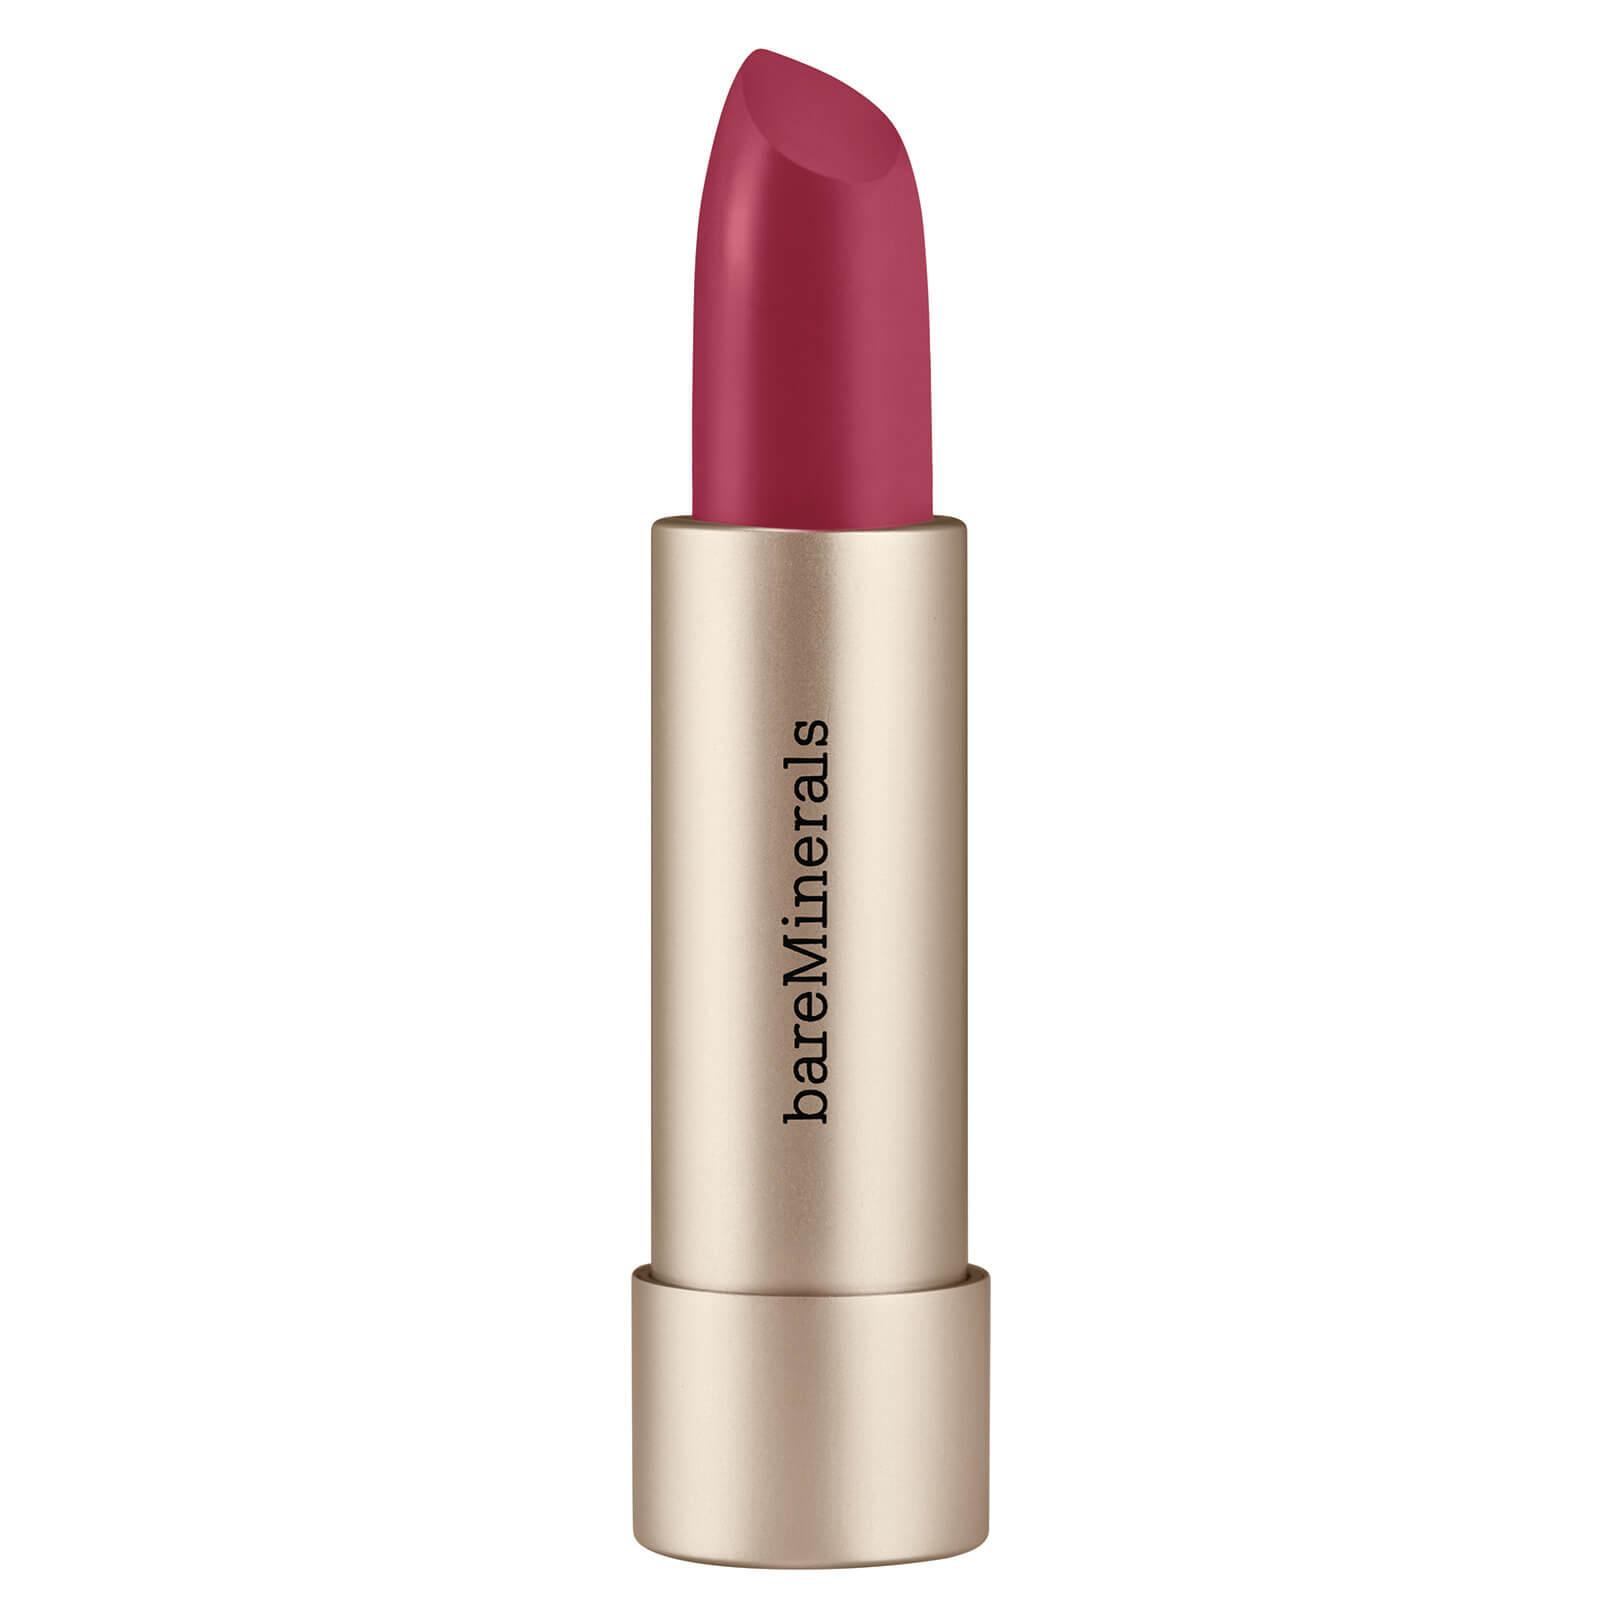 Image of bareMinerals Mineralist Hydra Smoothing Lipstick 3.6g (Various Shades) - Optimism